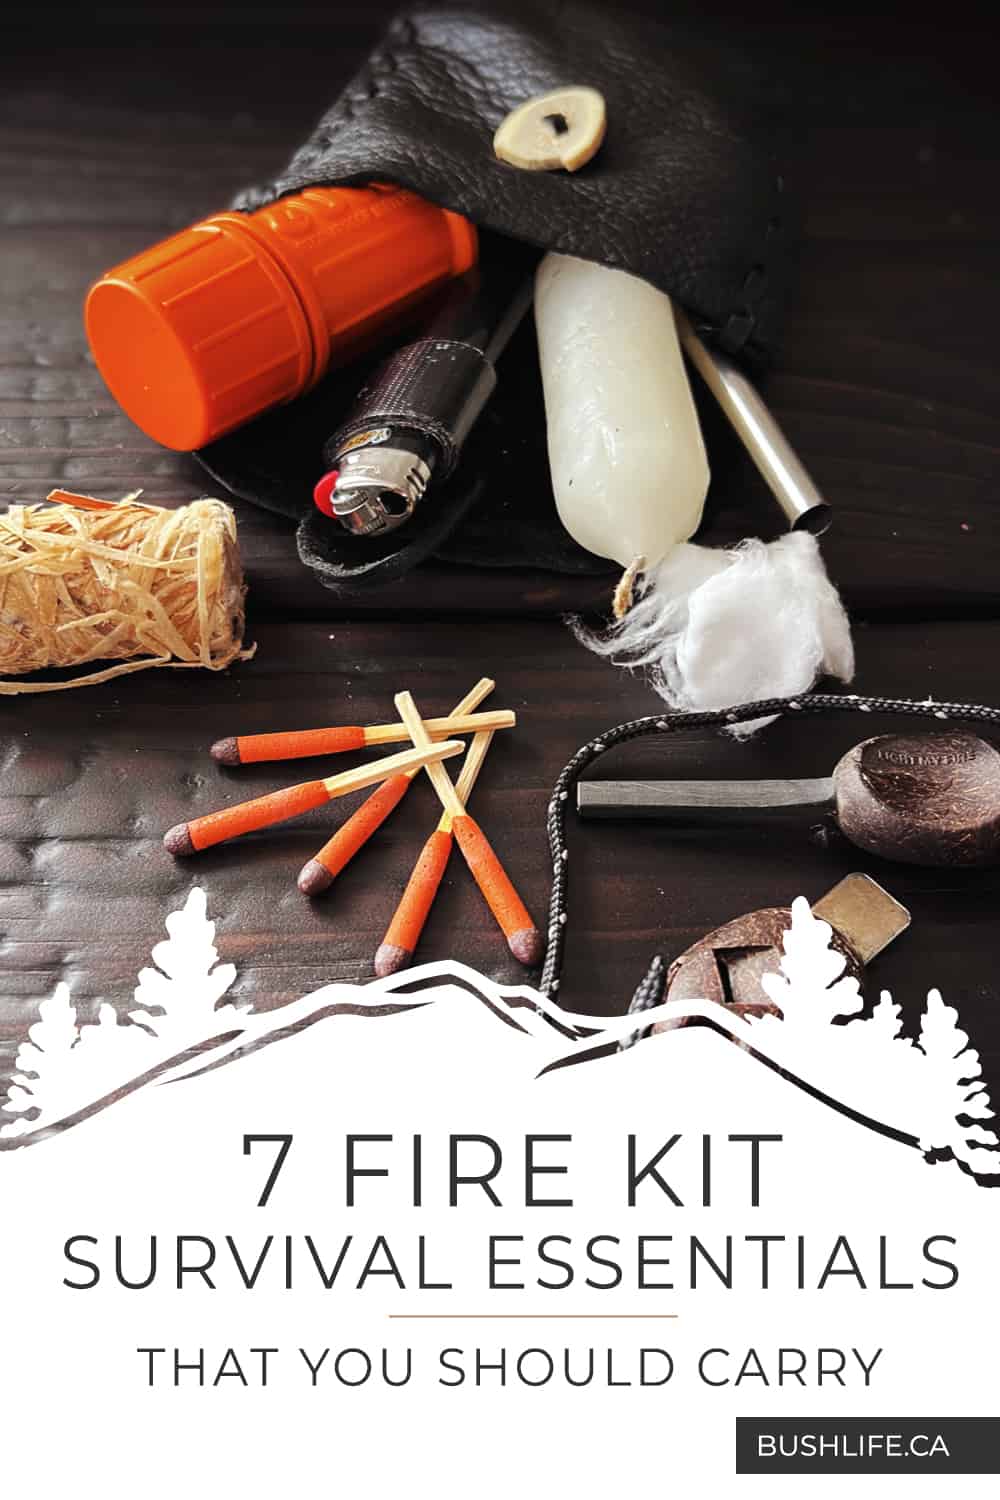 7 Fire Kit Survival Essentials That You Should Carry